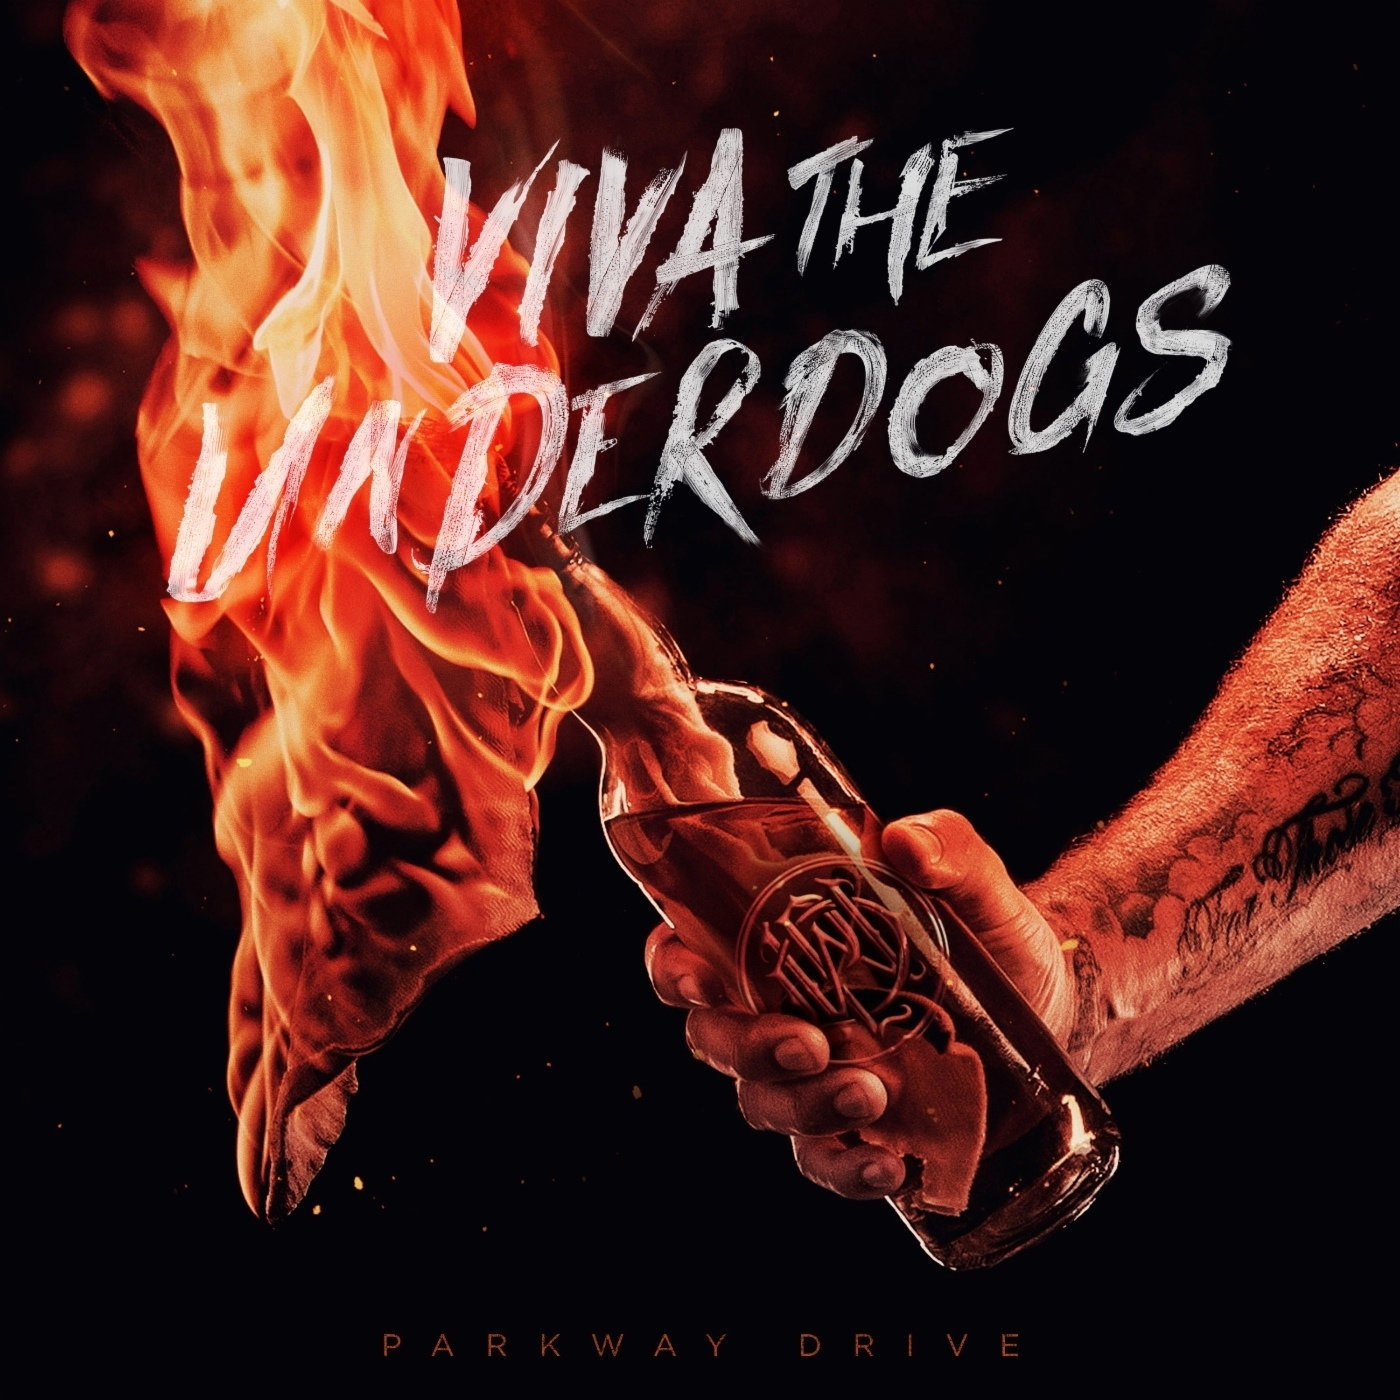 Parkway Drive : Viva The Underdogs